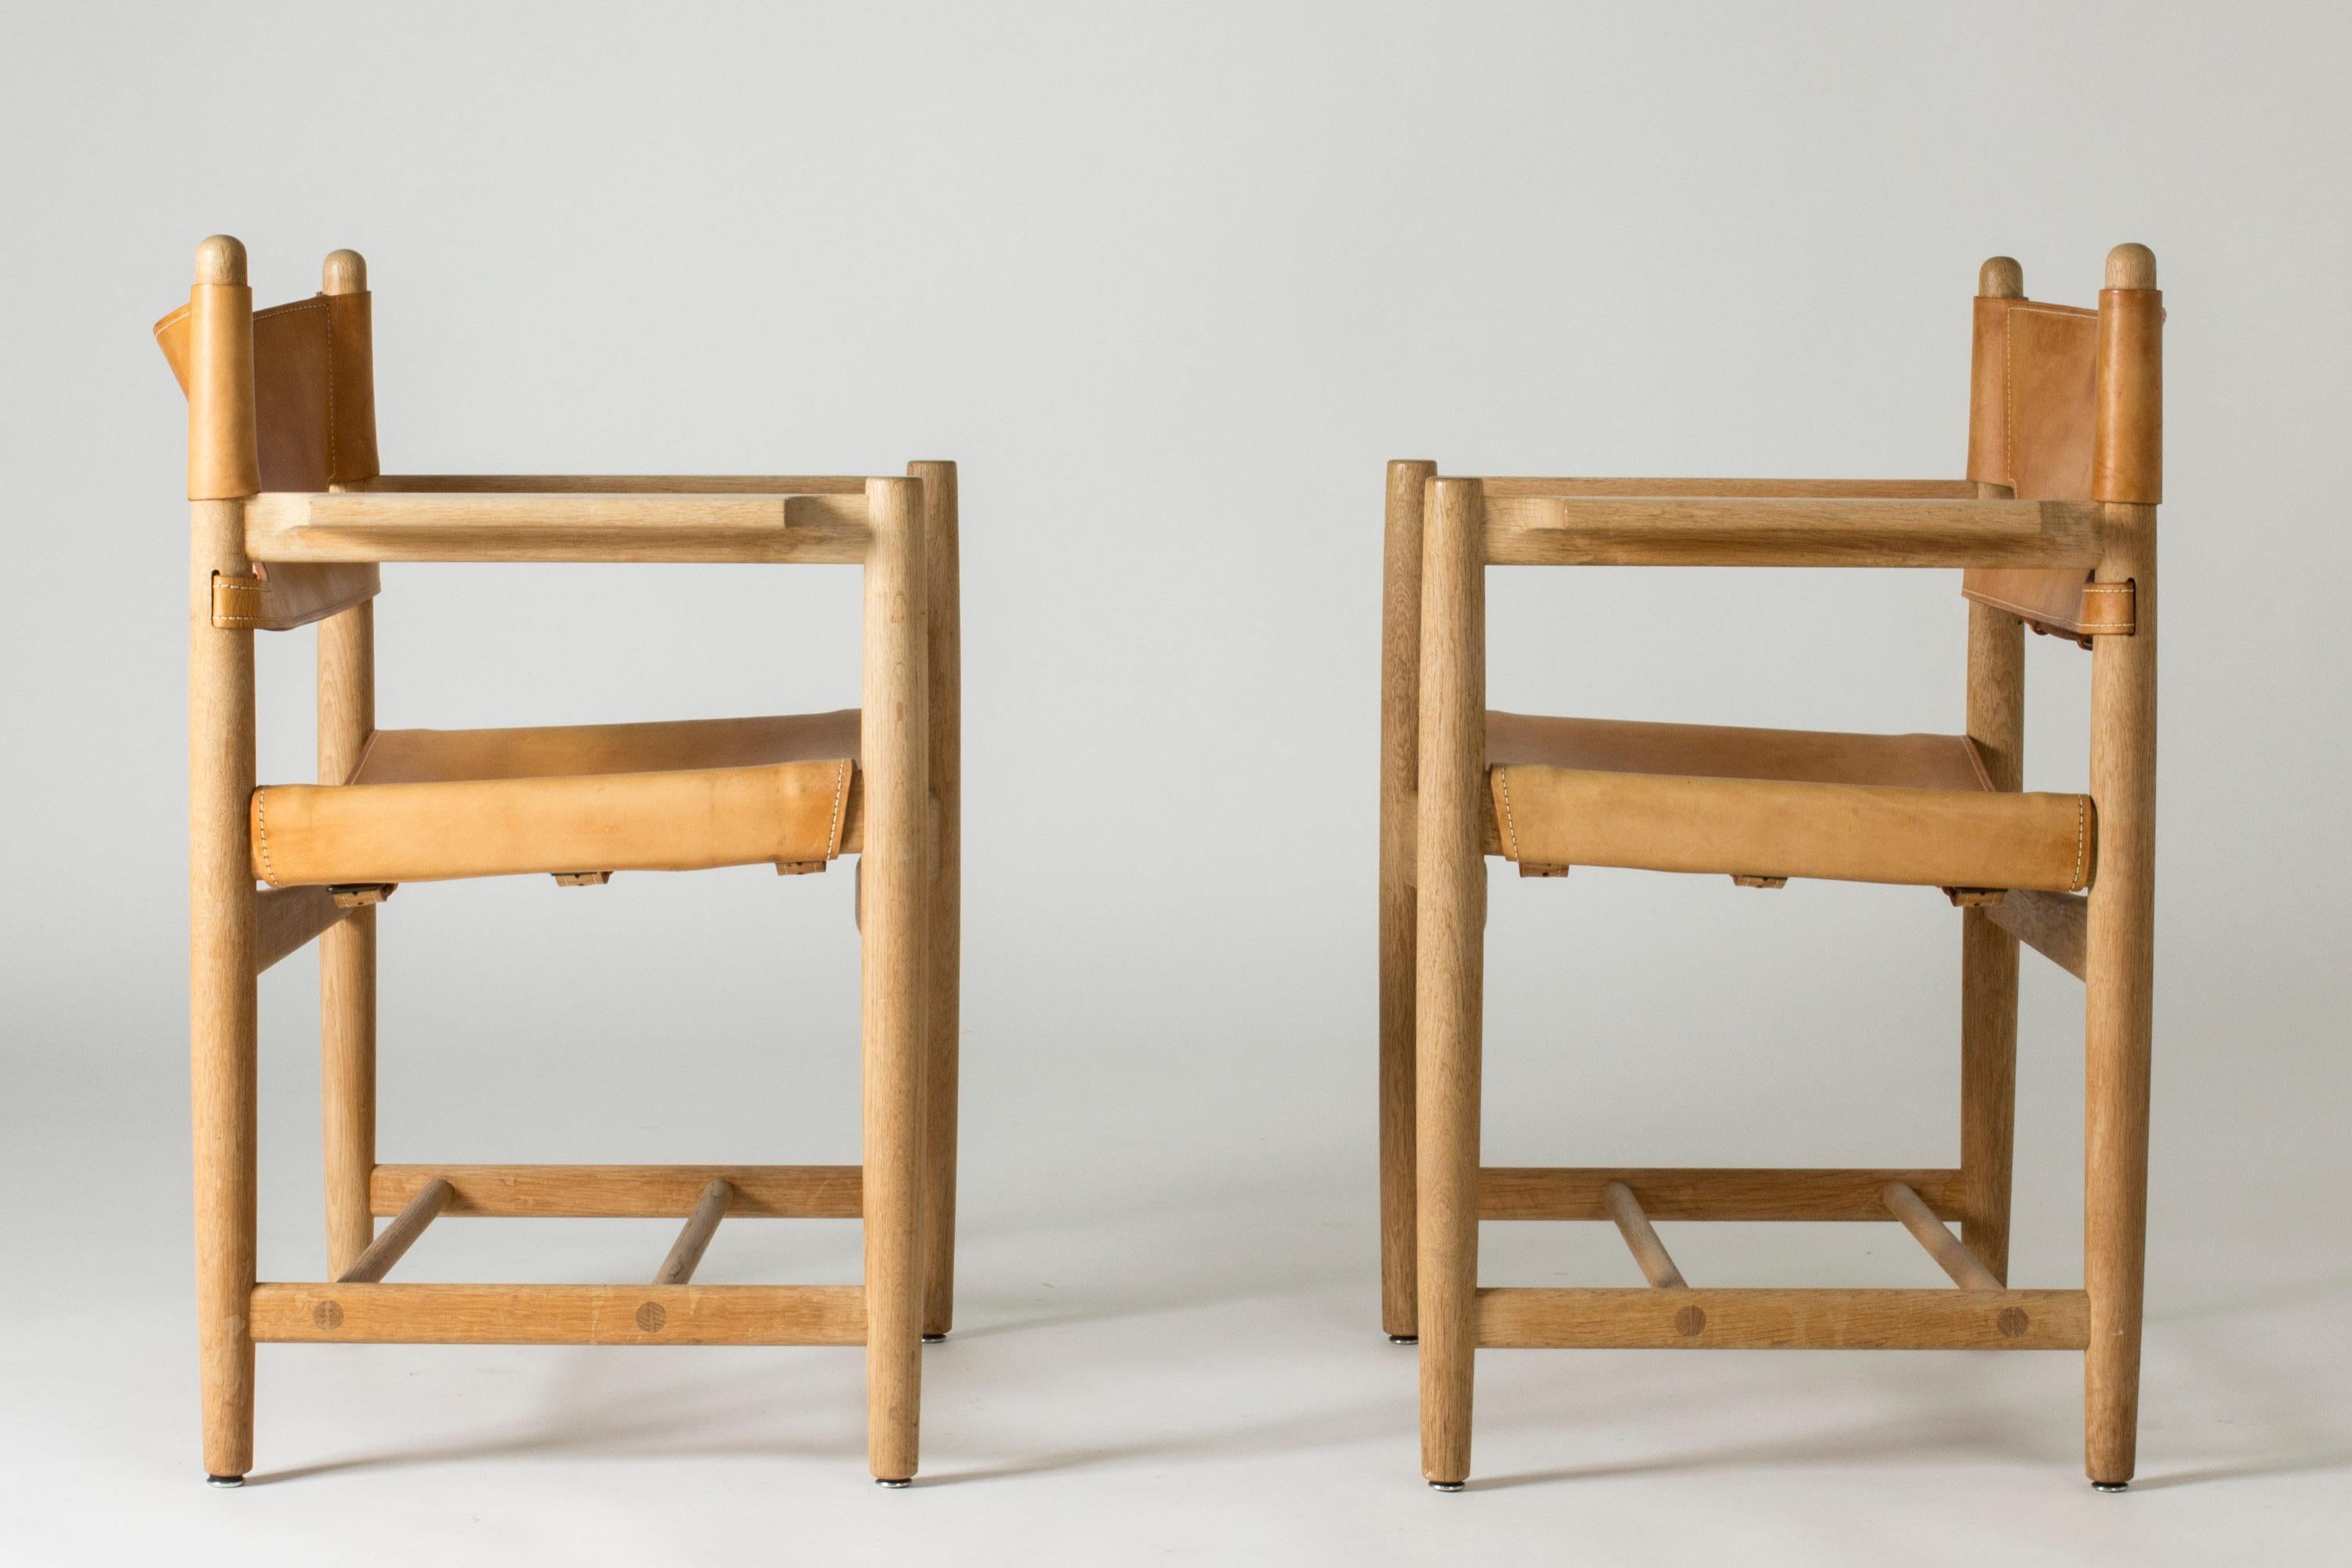 Pair of hunting chairs, model 3238, by Børge Mogensen. Made from oak and leather with accentuated white seams and buckles in the back. A great design, comfortable to be seated in.